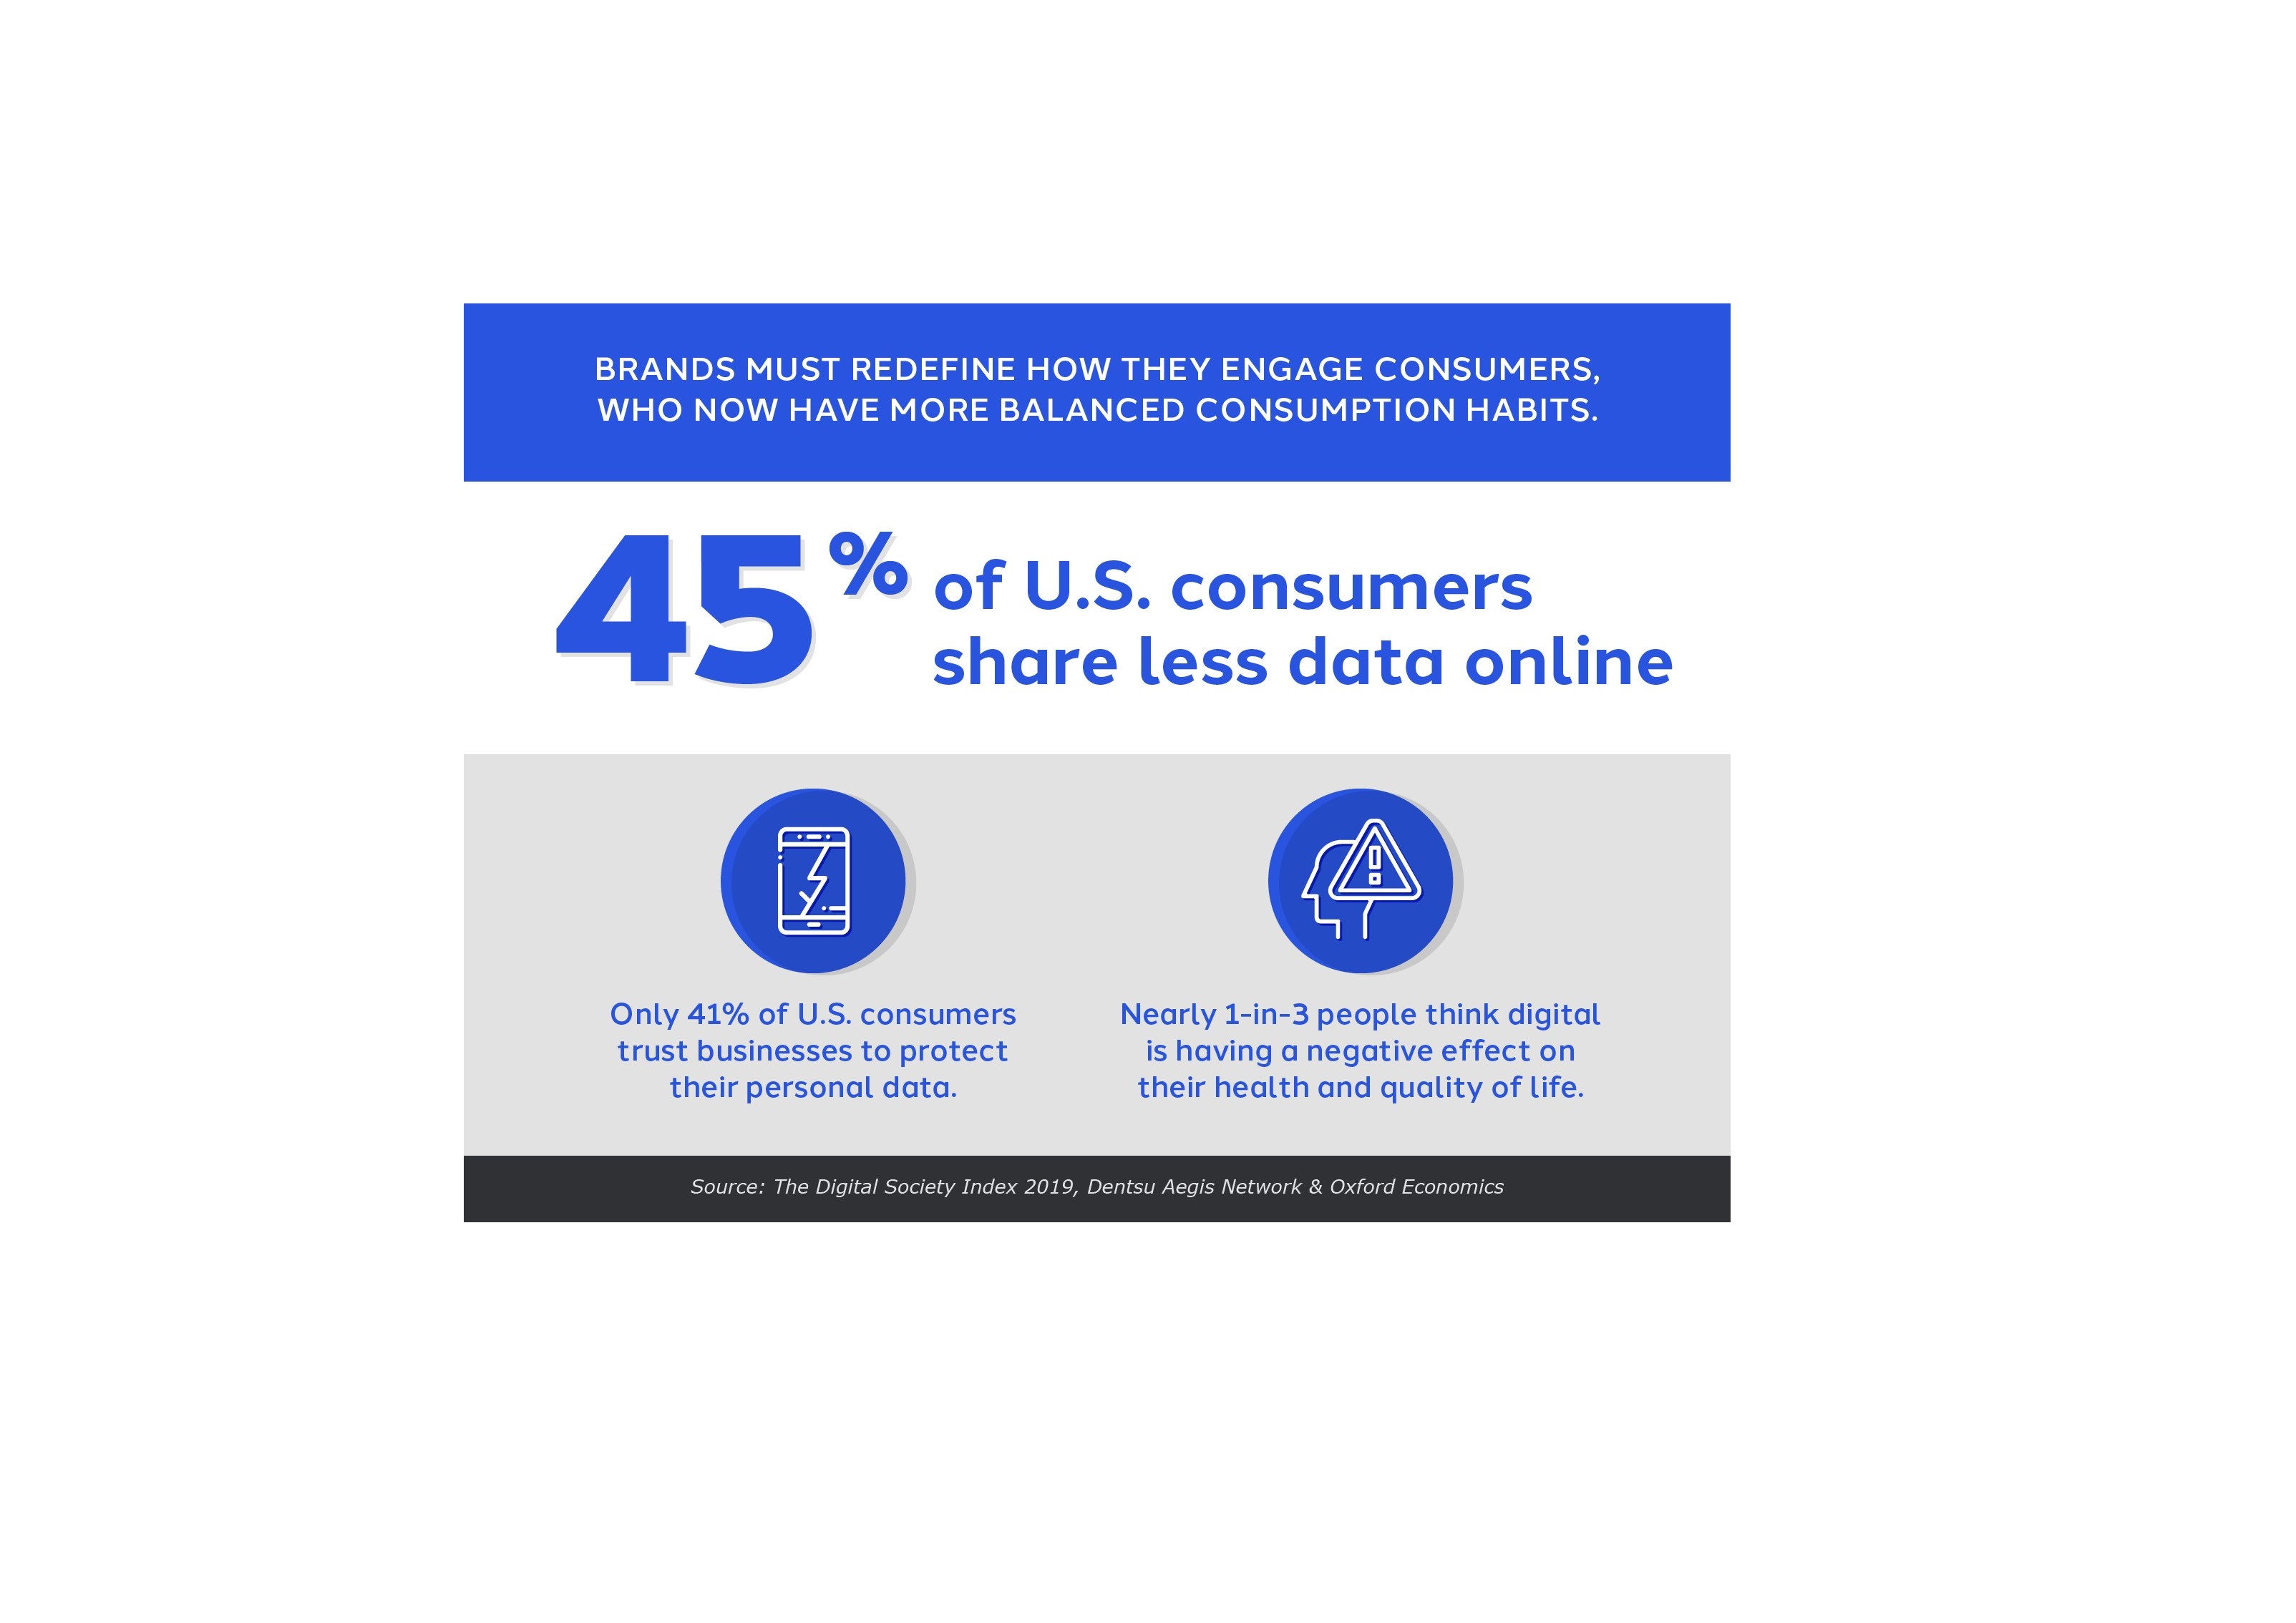 Cover image for  article: As Marketers Drive Digital and Data Agendas, U.S. Consumer Awareness and Skepticism Increases, With Implications for CMOs: Survey